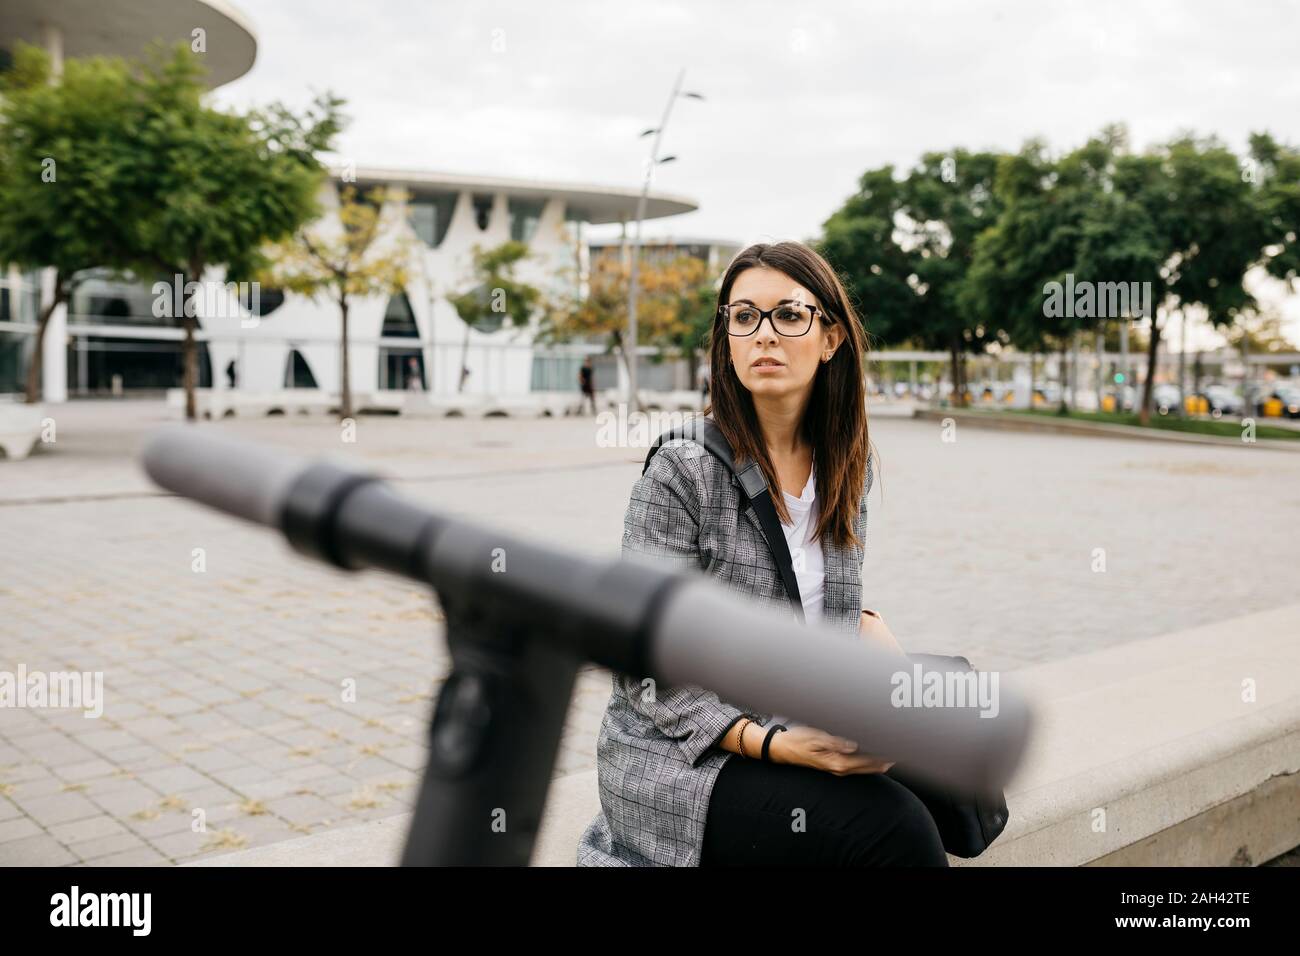 Young businesswoman with e-scooter in the city, looking sideways Stock Photo